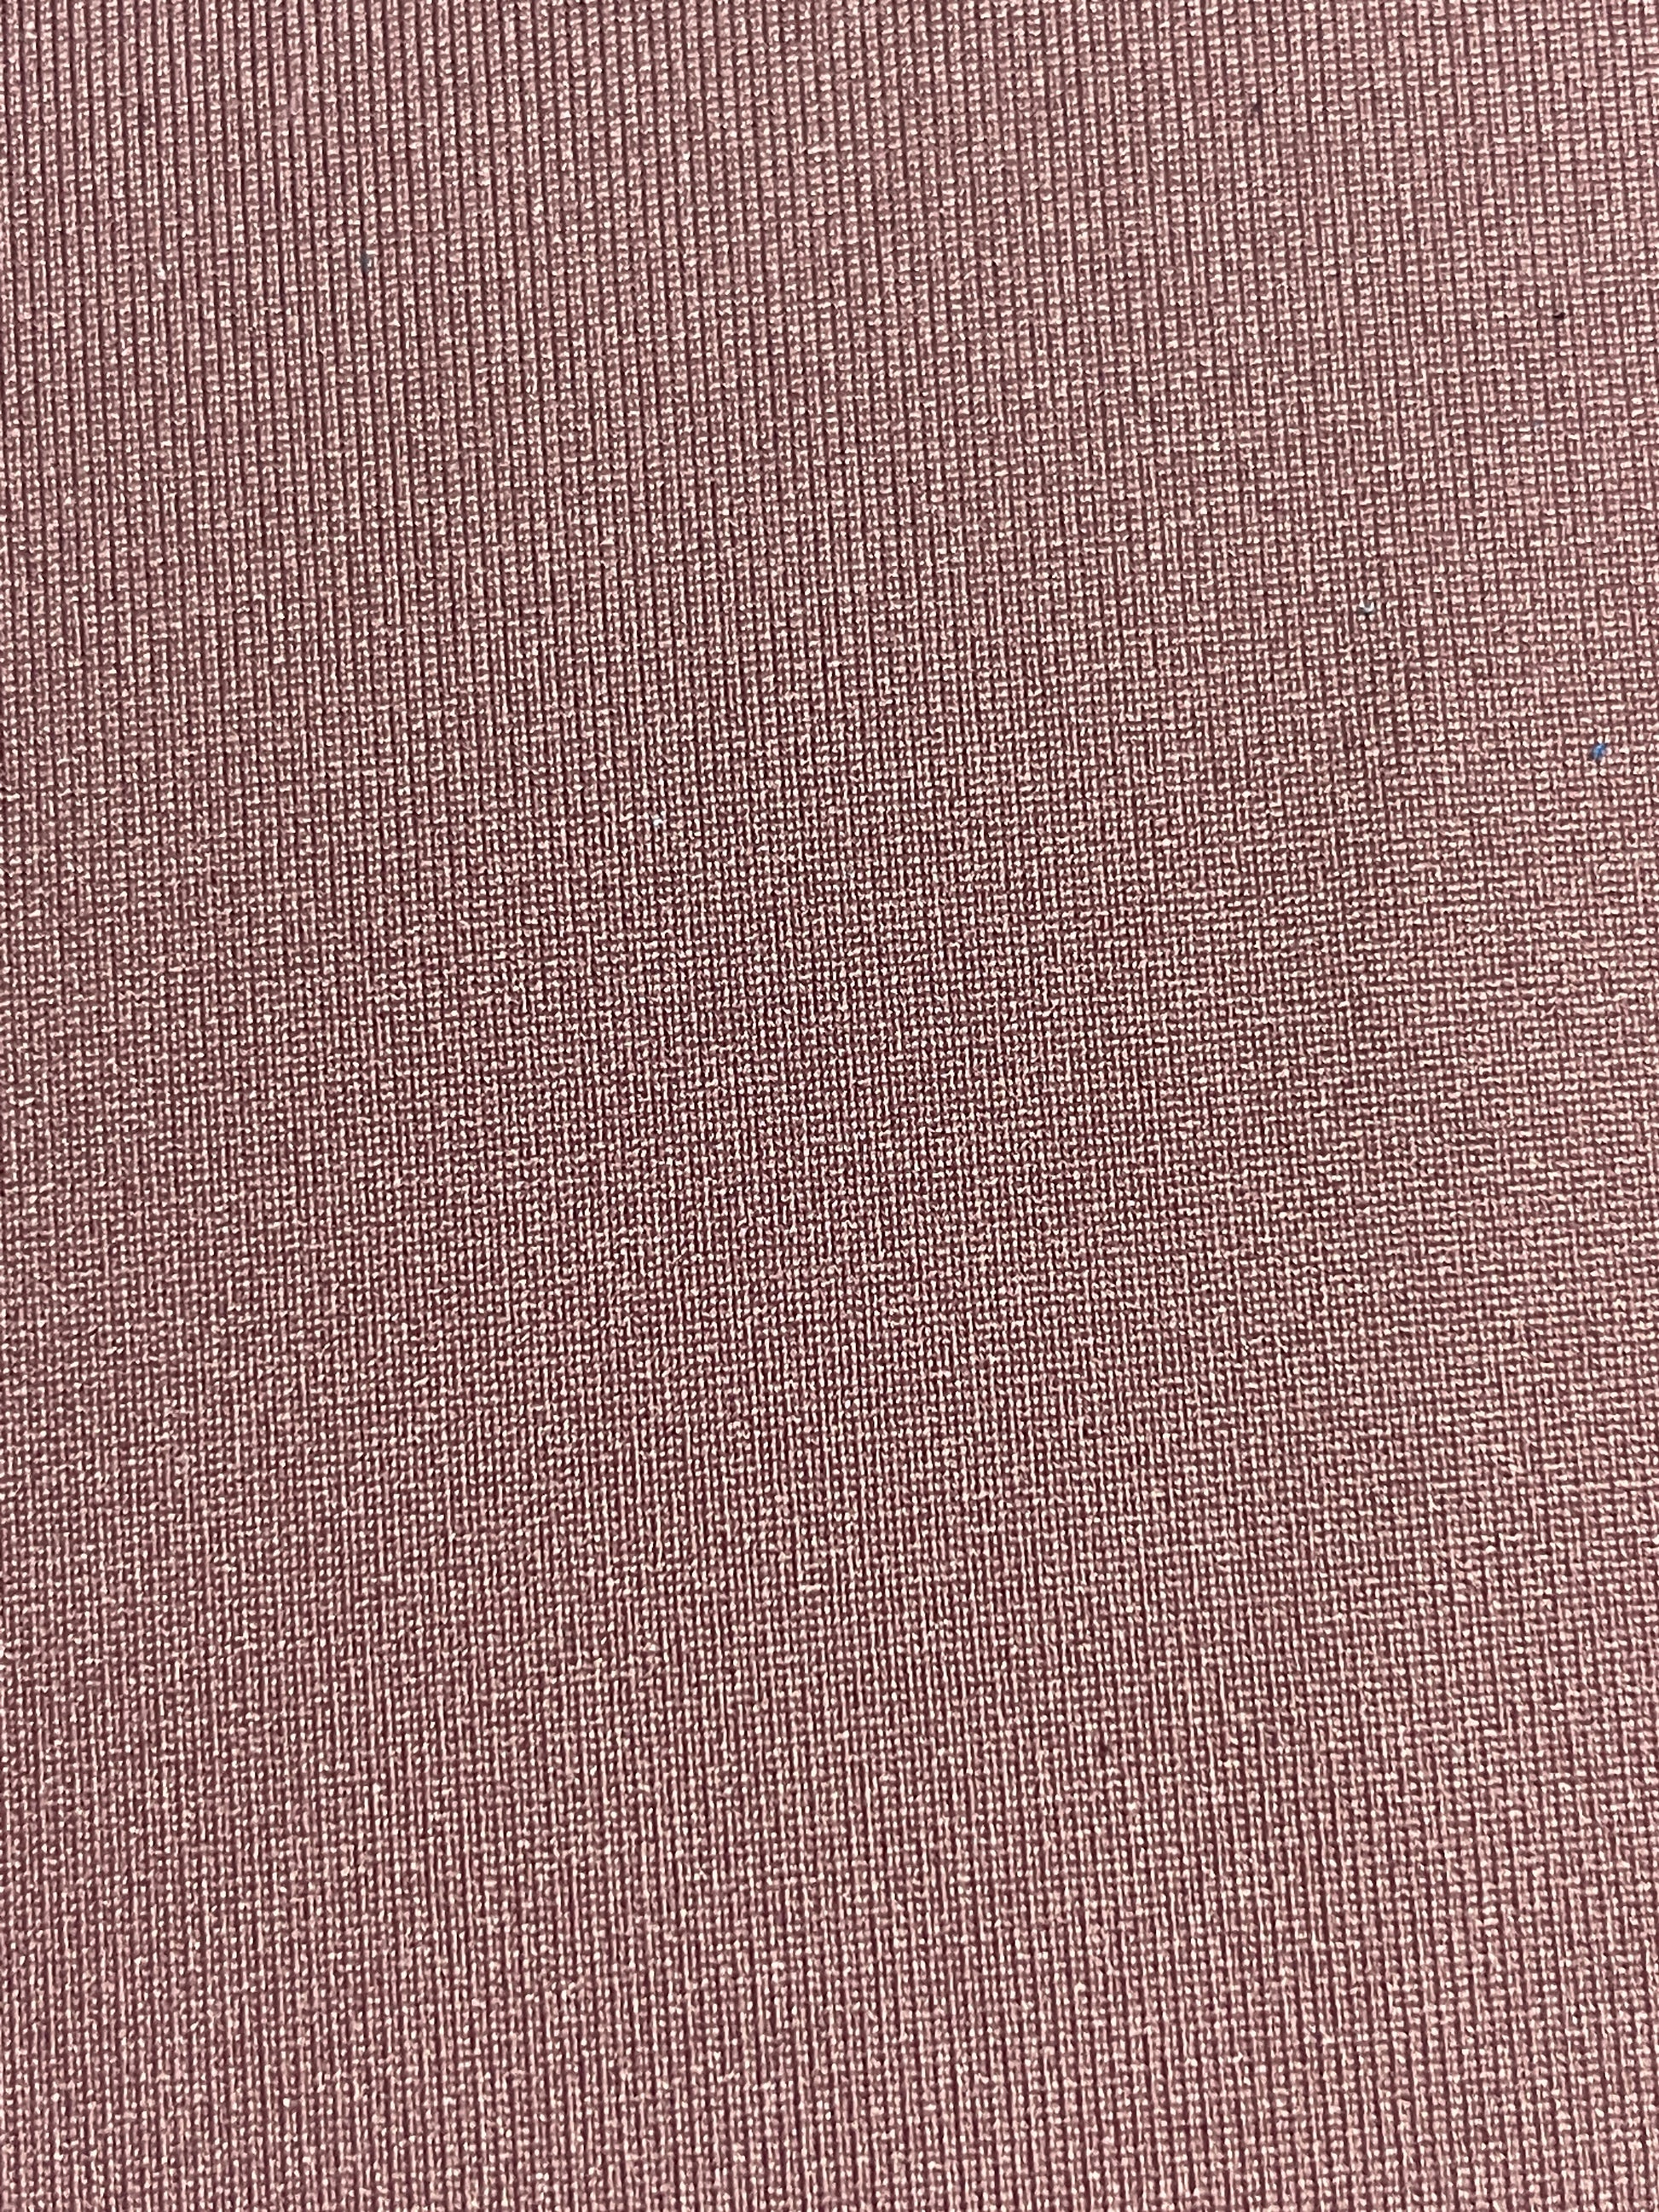 Hot Selling Quick Dry Poly Lycra  Fabric For Activewear With Cotton Hand-Feel - Natasha Fabric